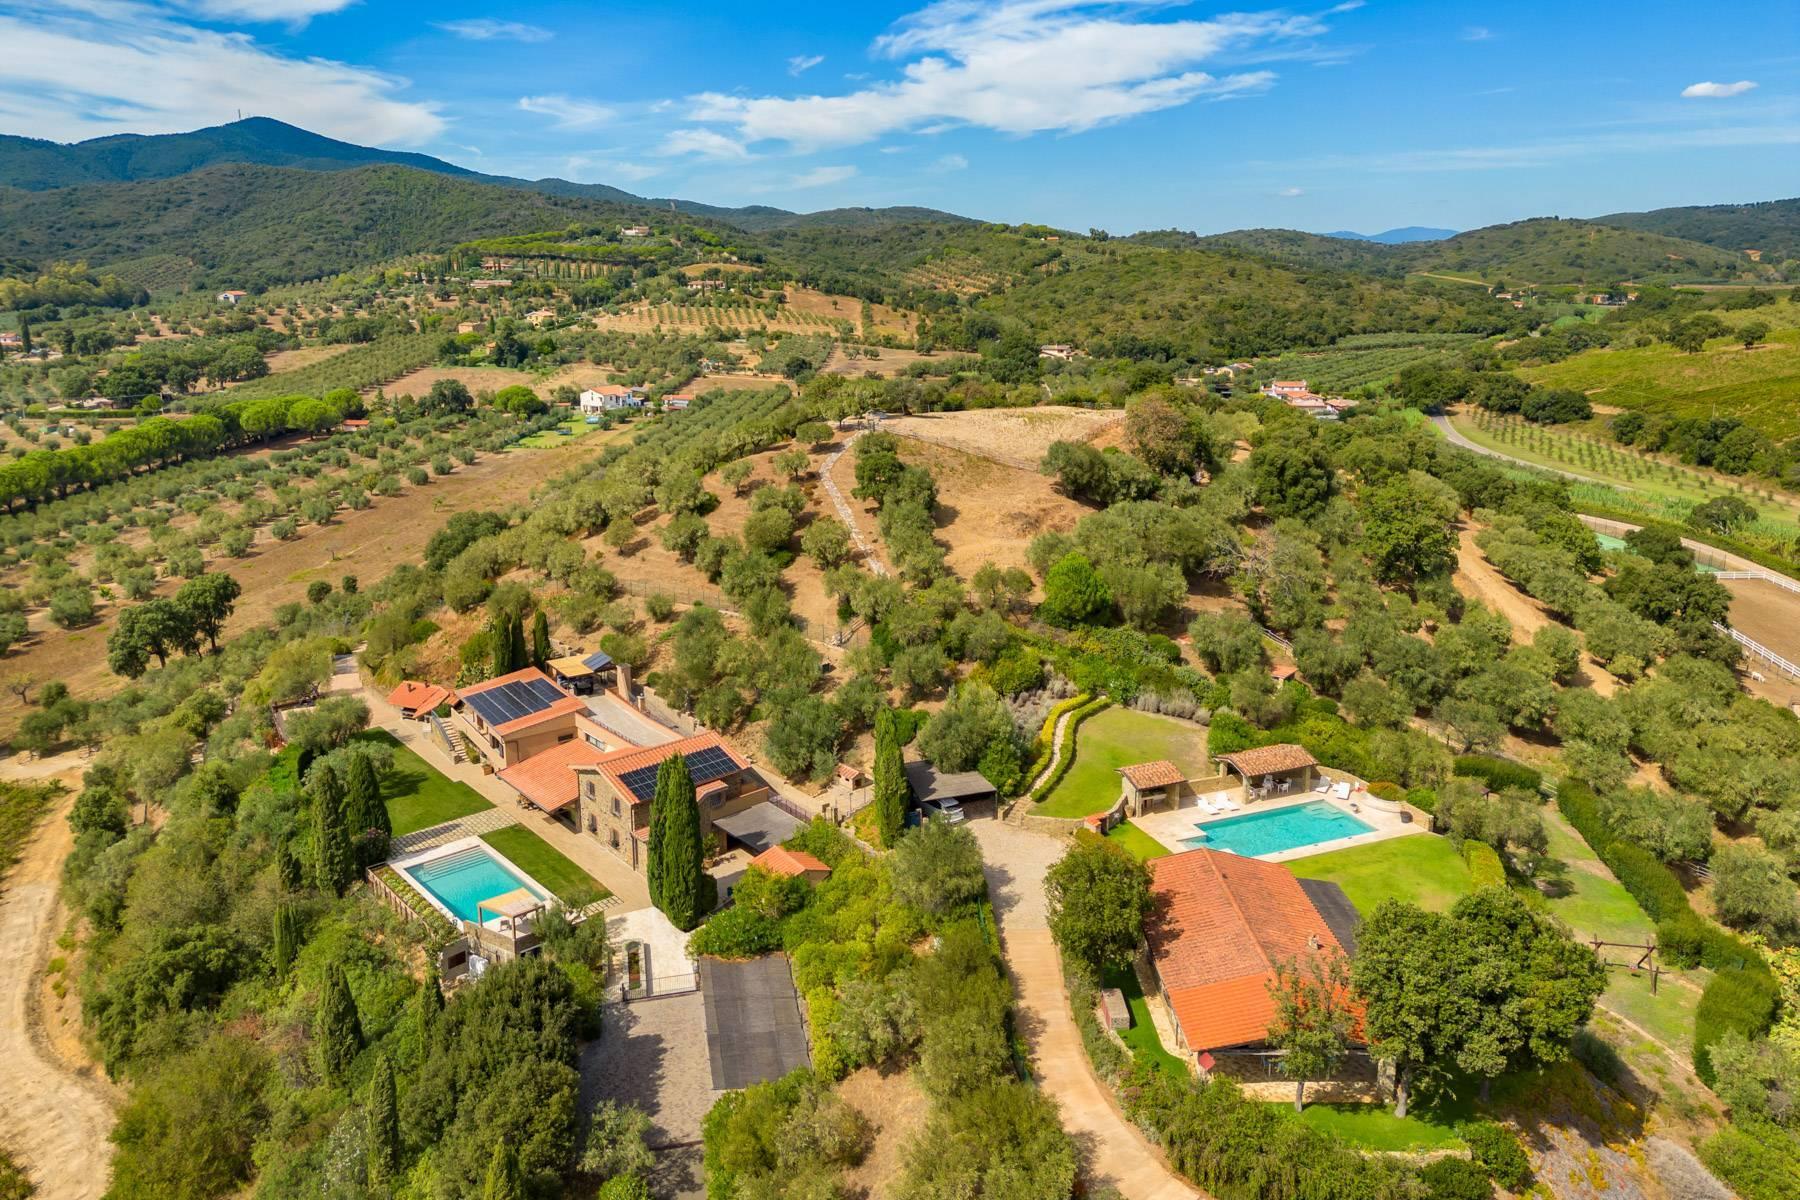 Inspiring tuscan estate with vineyards and olive groves - 1